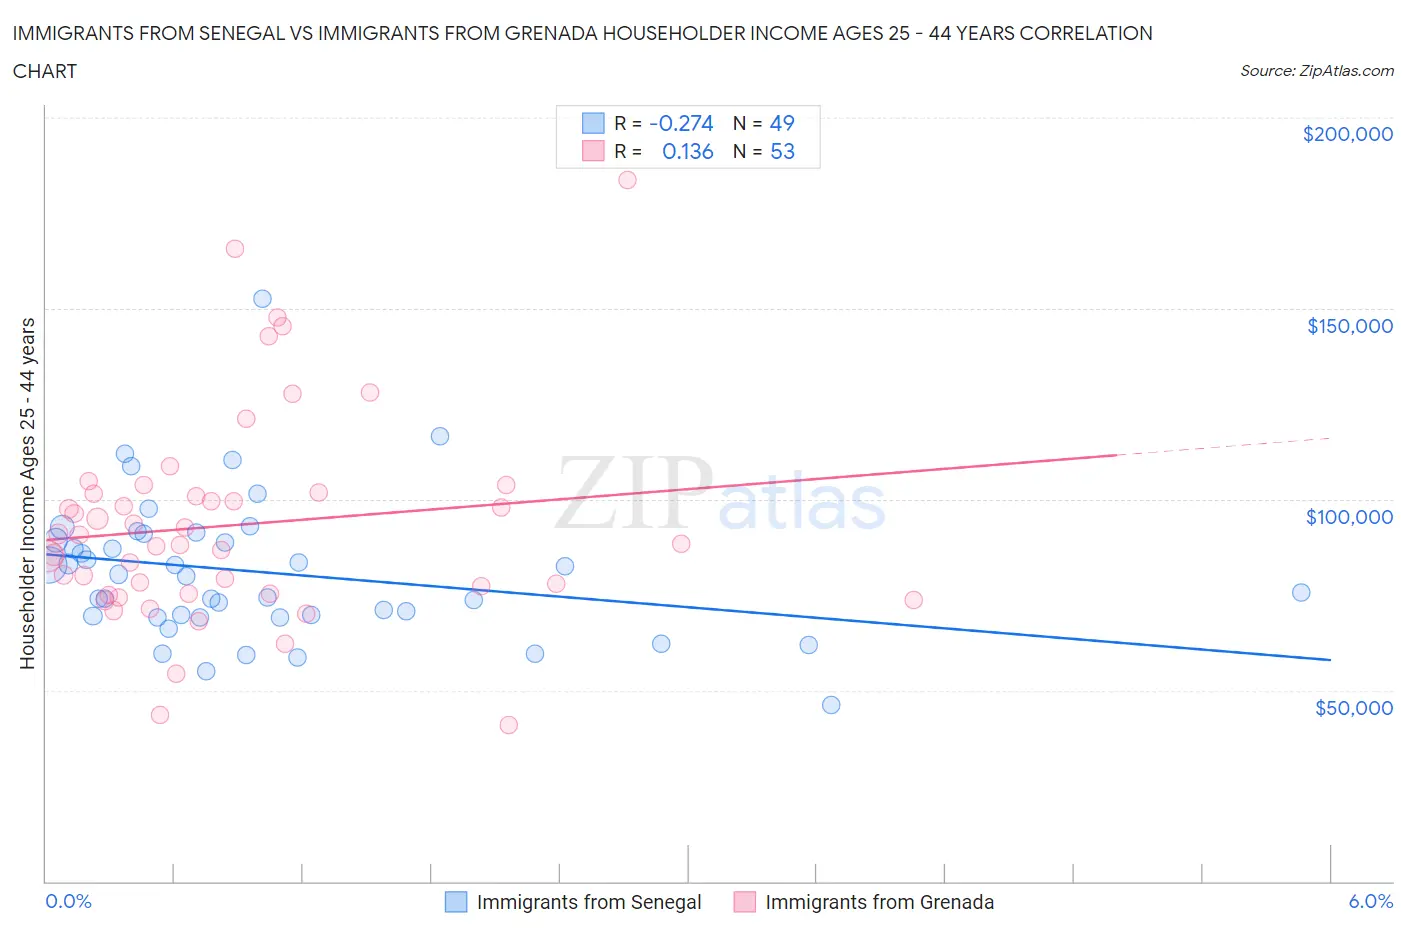 Immigrants from Senegal vs Immigrants from Grenada Householder Income Ages 25 - 44 years